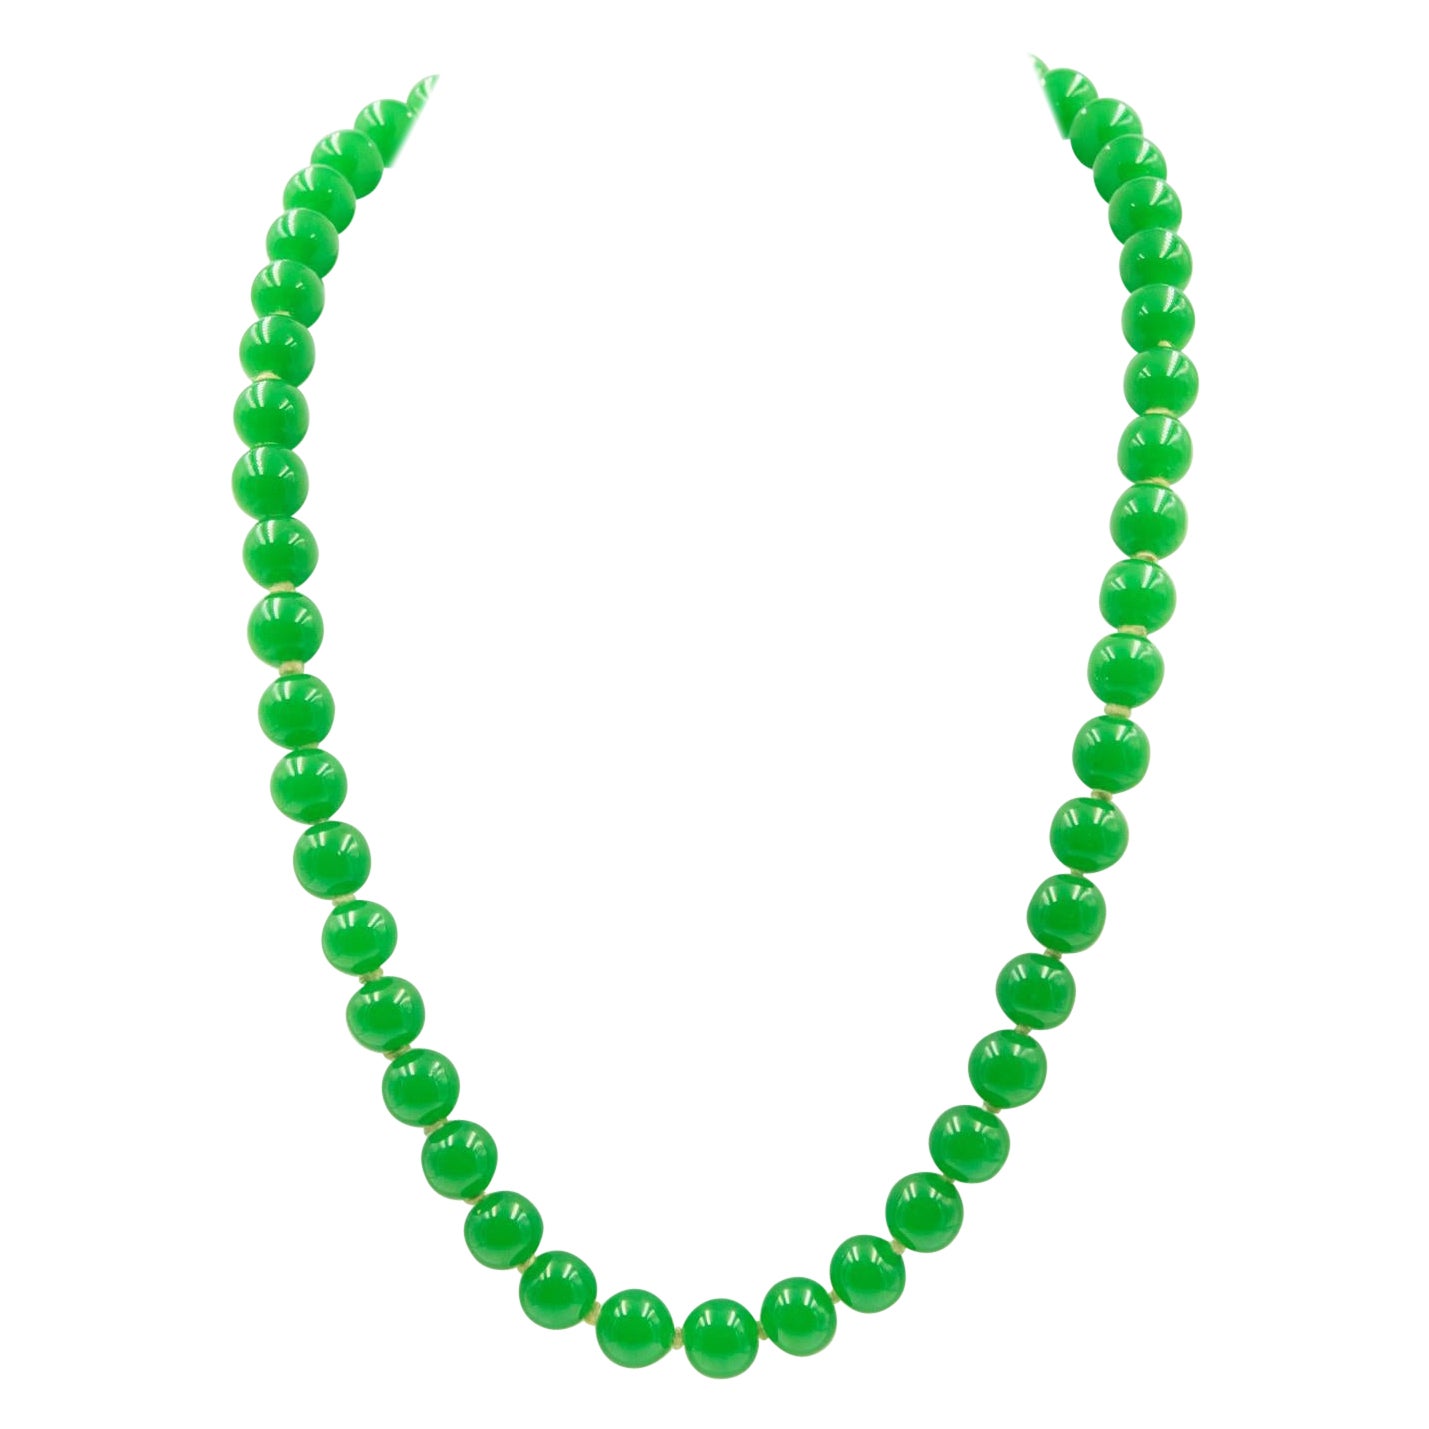 Imperial Green Peking Glass Bead Necklace with Rhinestone Clasp by Judith McCann